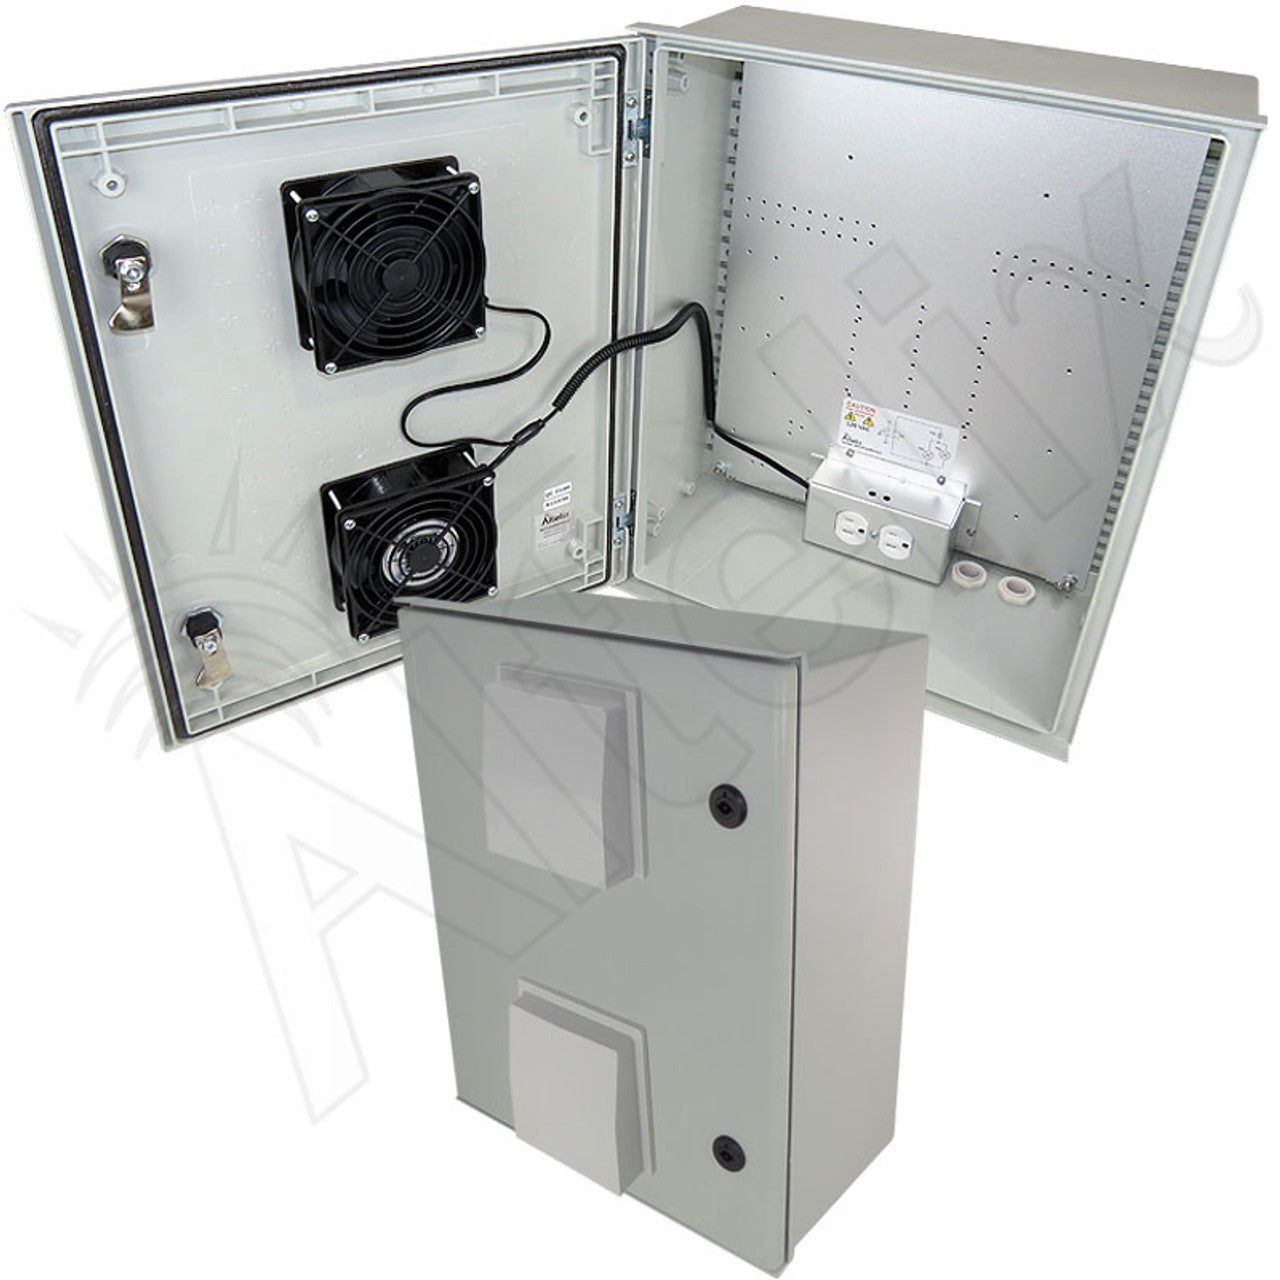 Altelix Vented Fiberglass Weatherproof NEMA Enclosure with 120 VAC Outlets, Power Cord, 200W Heater and 85°F Turn-On Cooling Fan-4